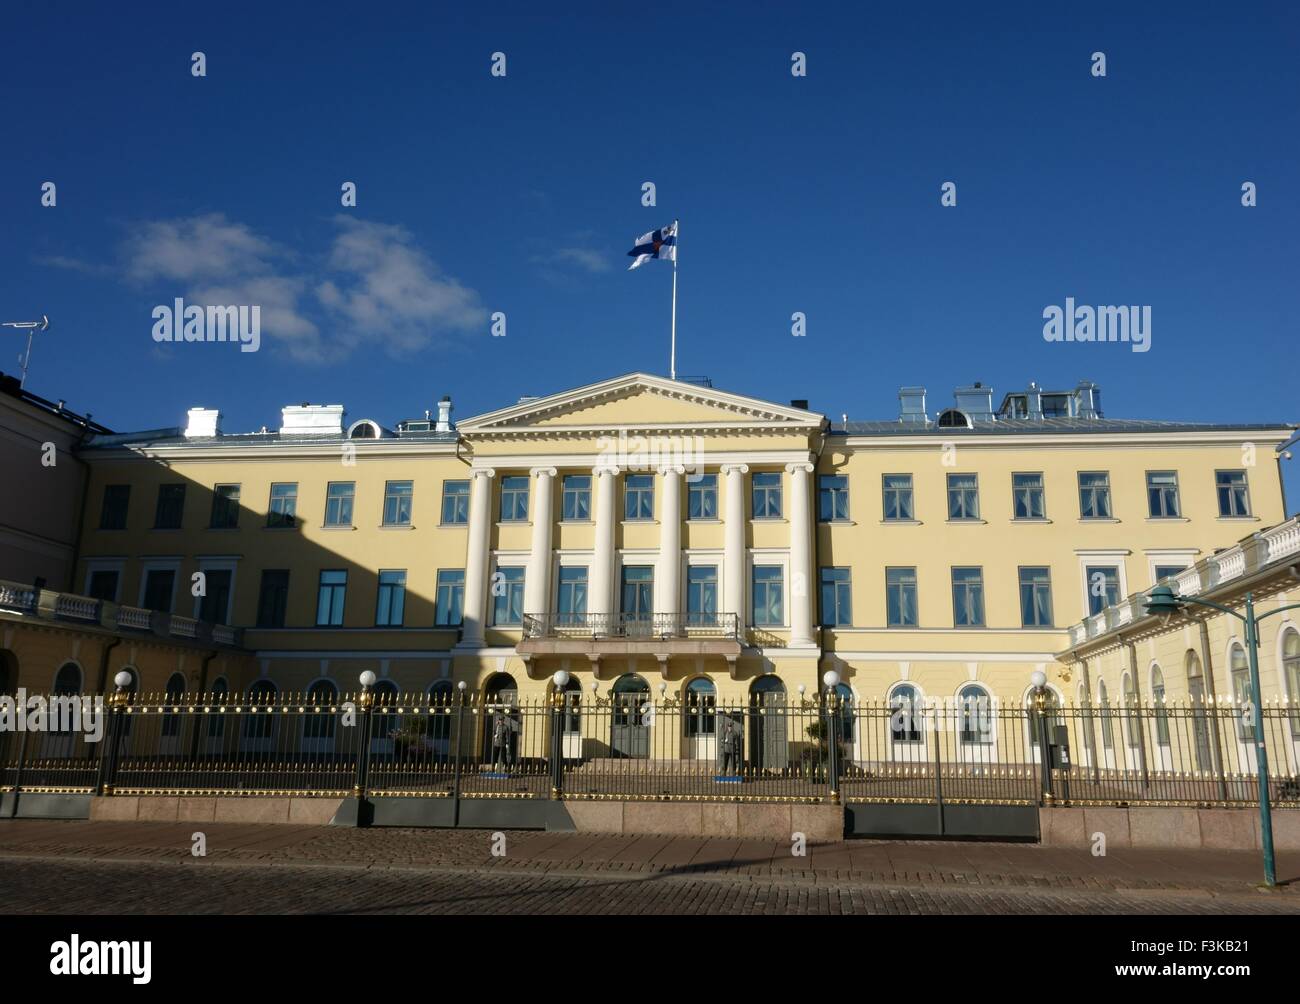 The Presidential Palace and its guards in Helsinki, Finland Stock Photo